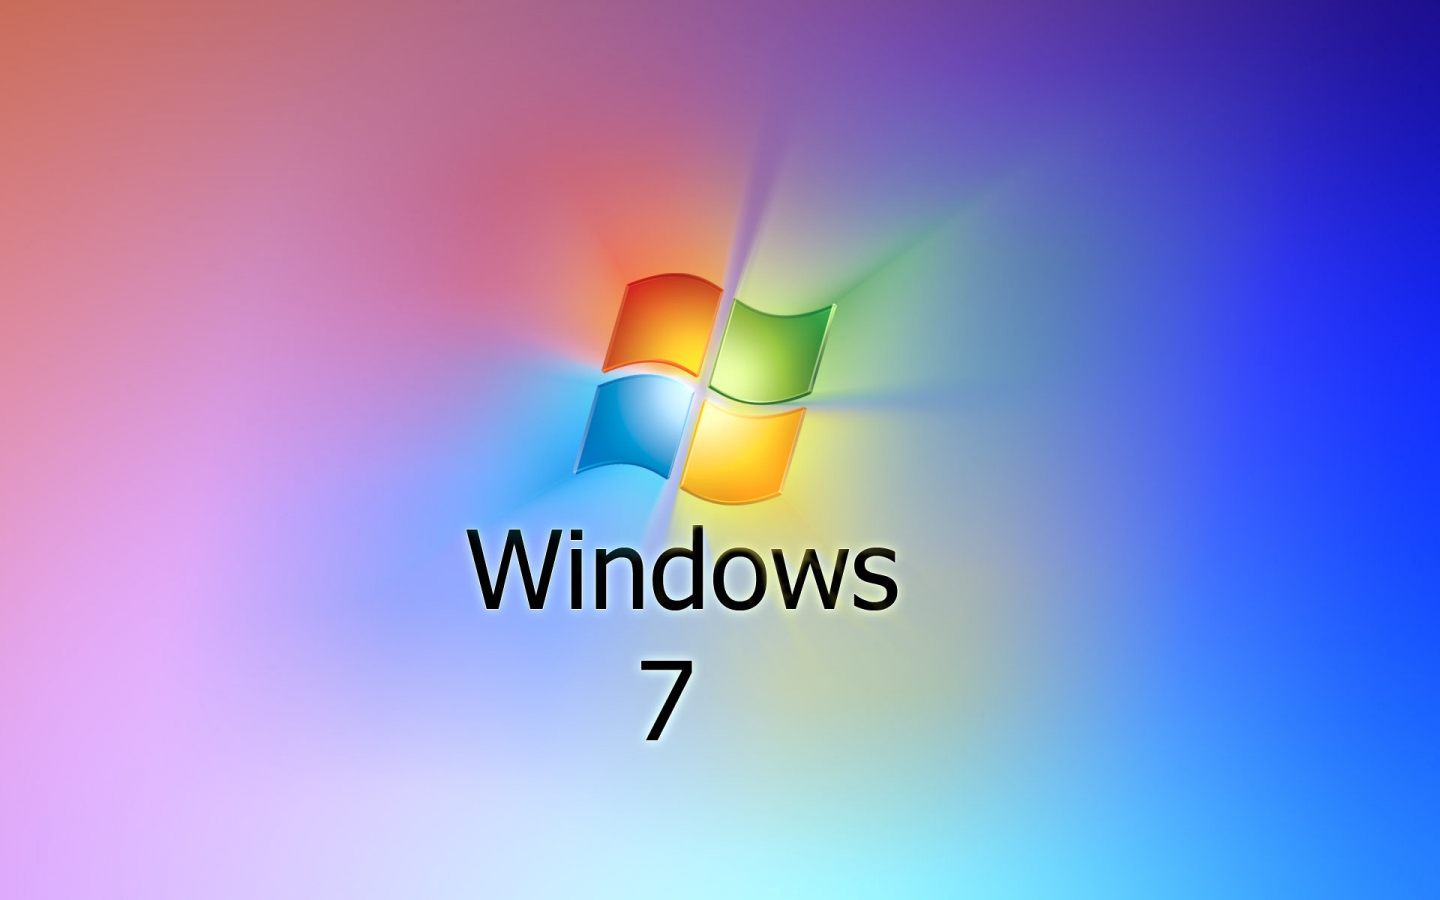 Windows 7 Simple for 1440 x 900 widescreen resolution